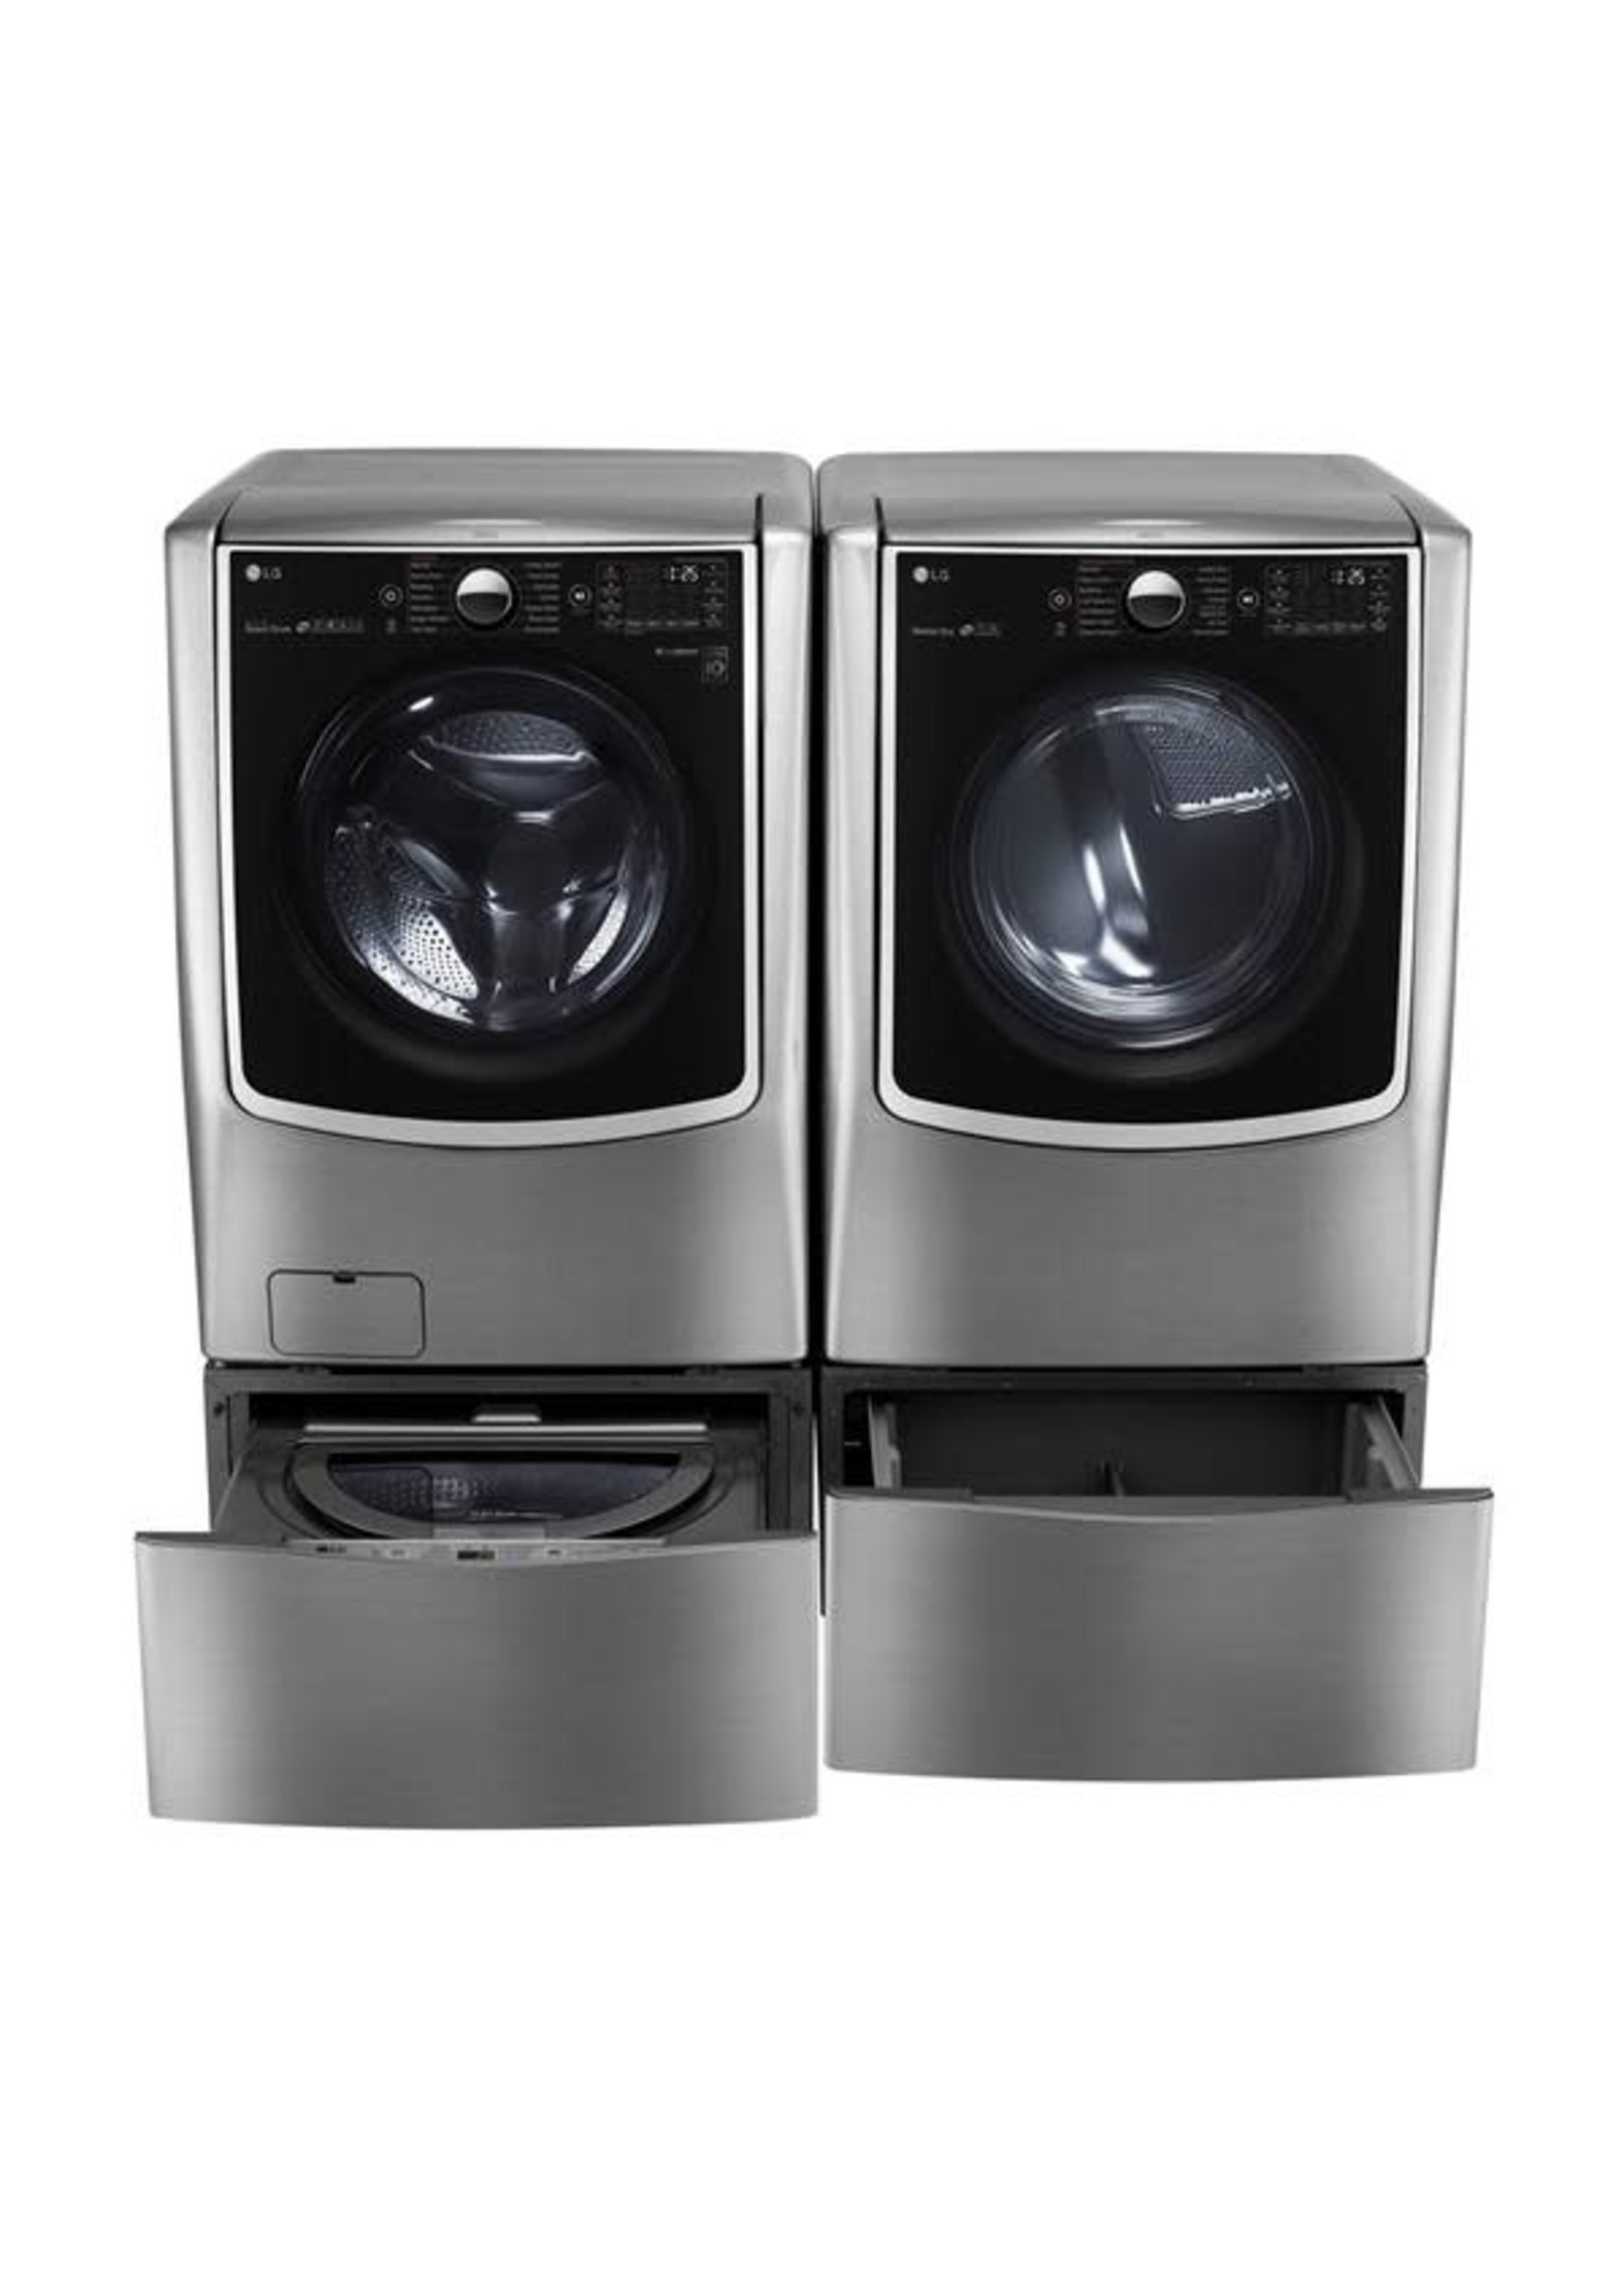 LG LG Signature TurboWash Series  Side-by-Side on SideKick Pedestals Washer & Dryer Set with Front Load Washer and Gas Dryer in Black Stainless Steel